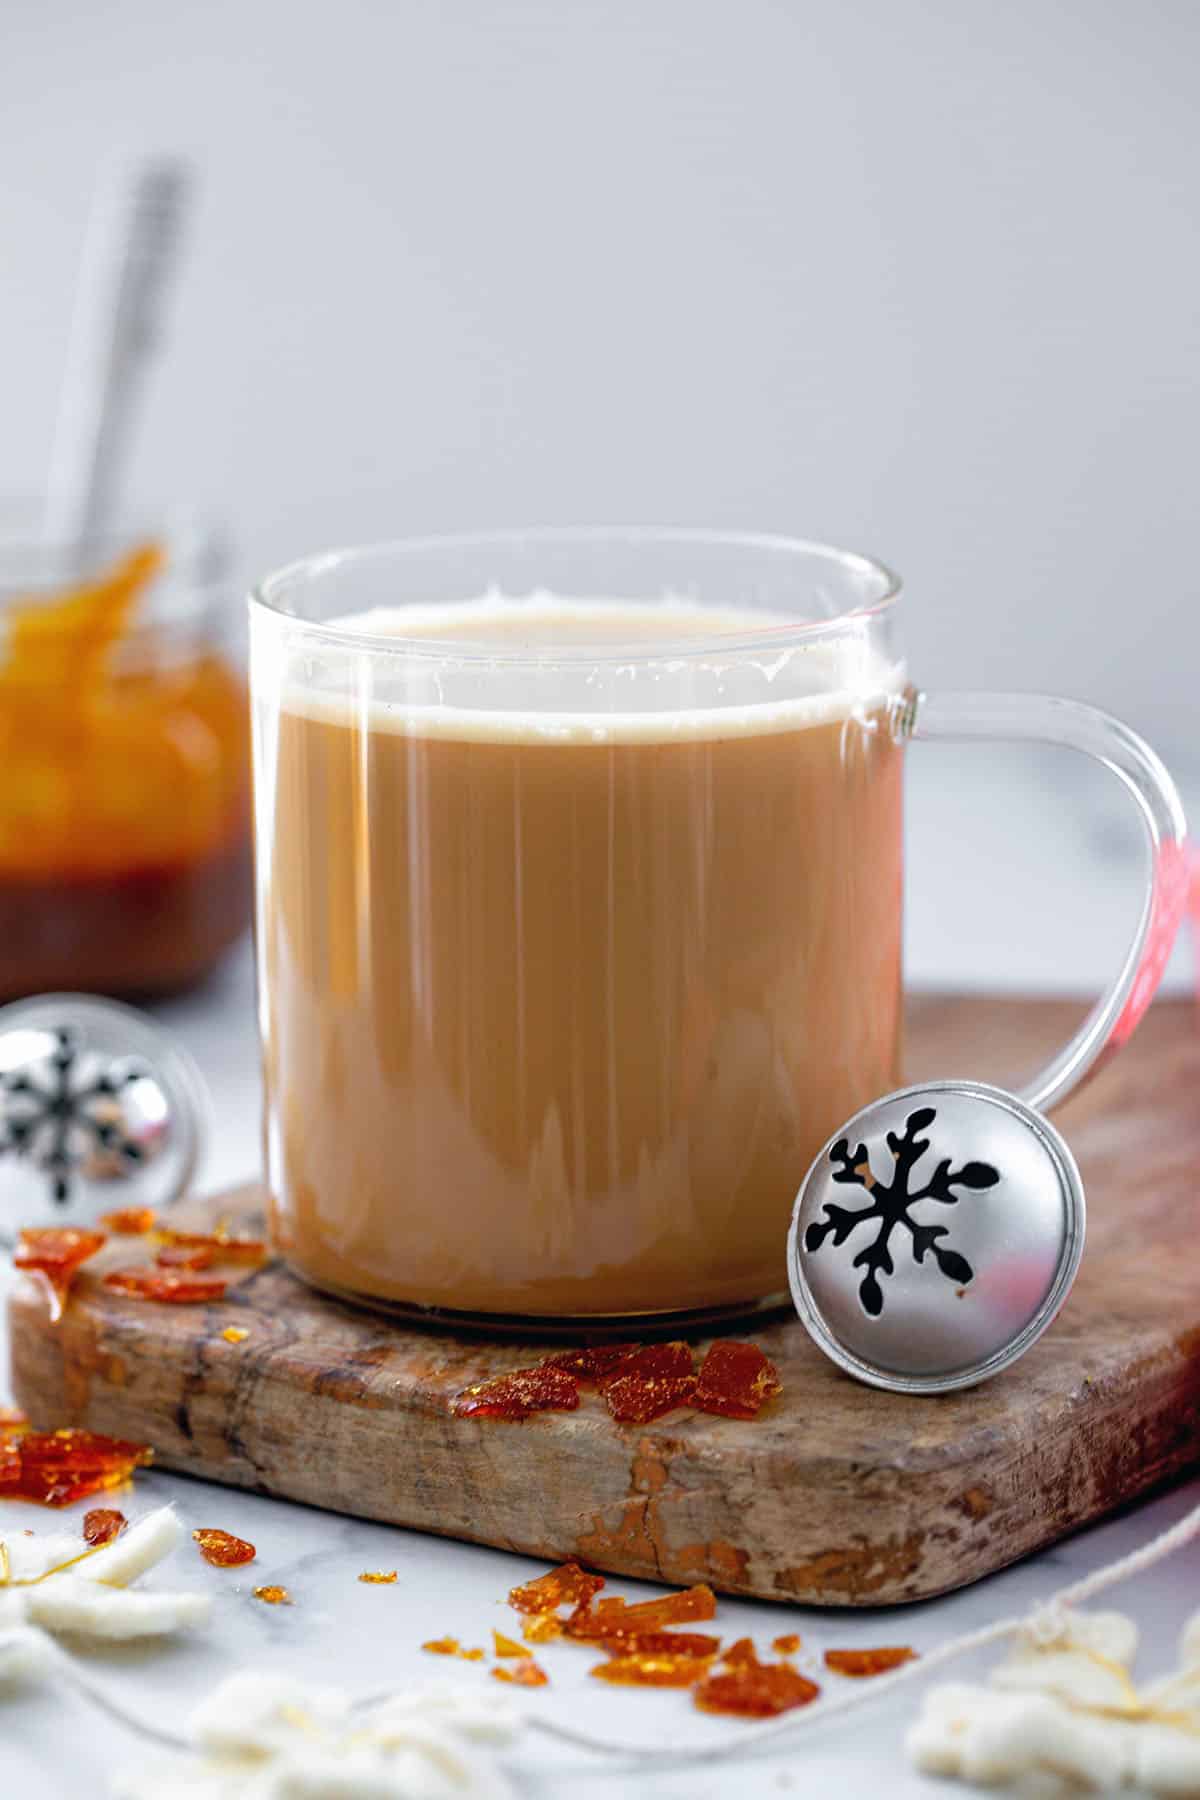 Caramel Brulée Latte without toppings in clear glass mug.